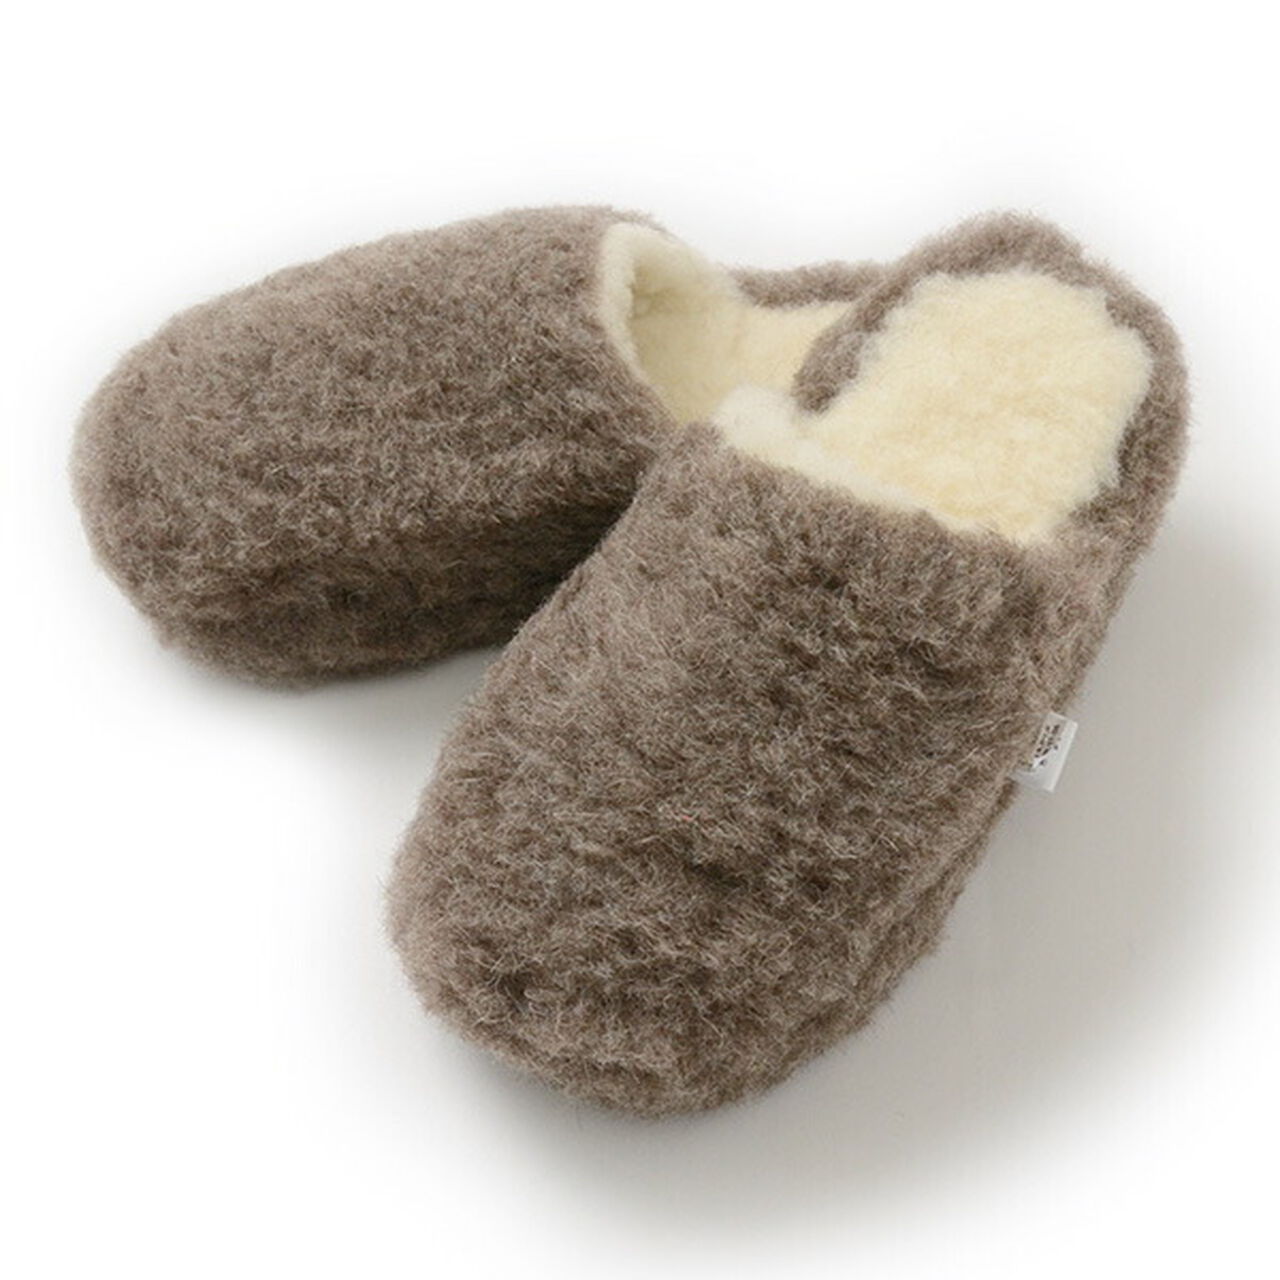 Boa Wool Basic Slippers,MidBrown, large image number 0